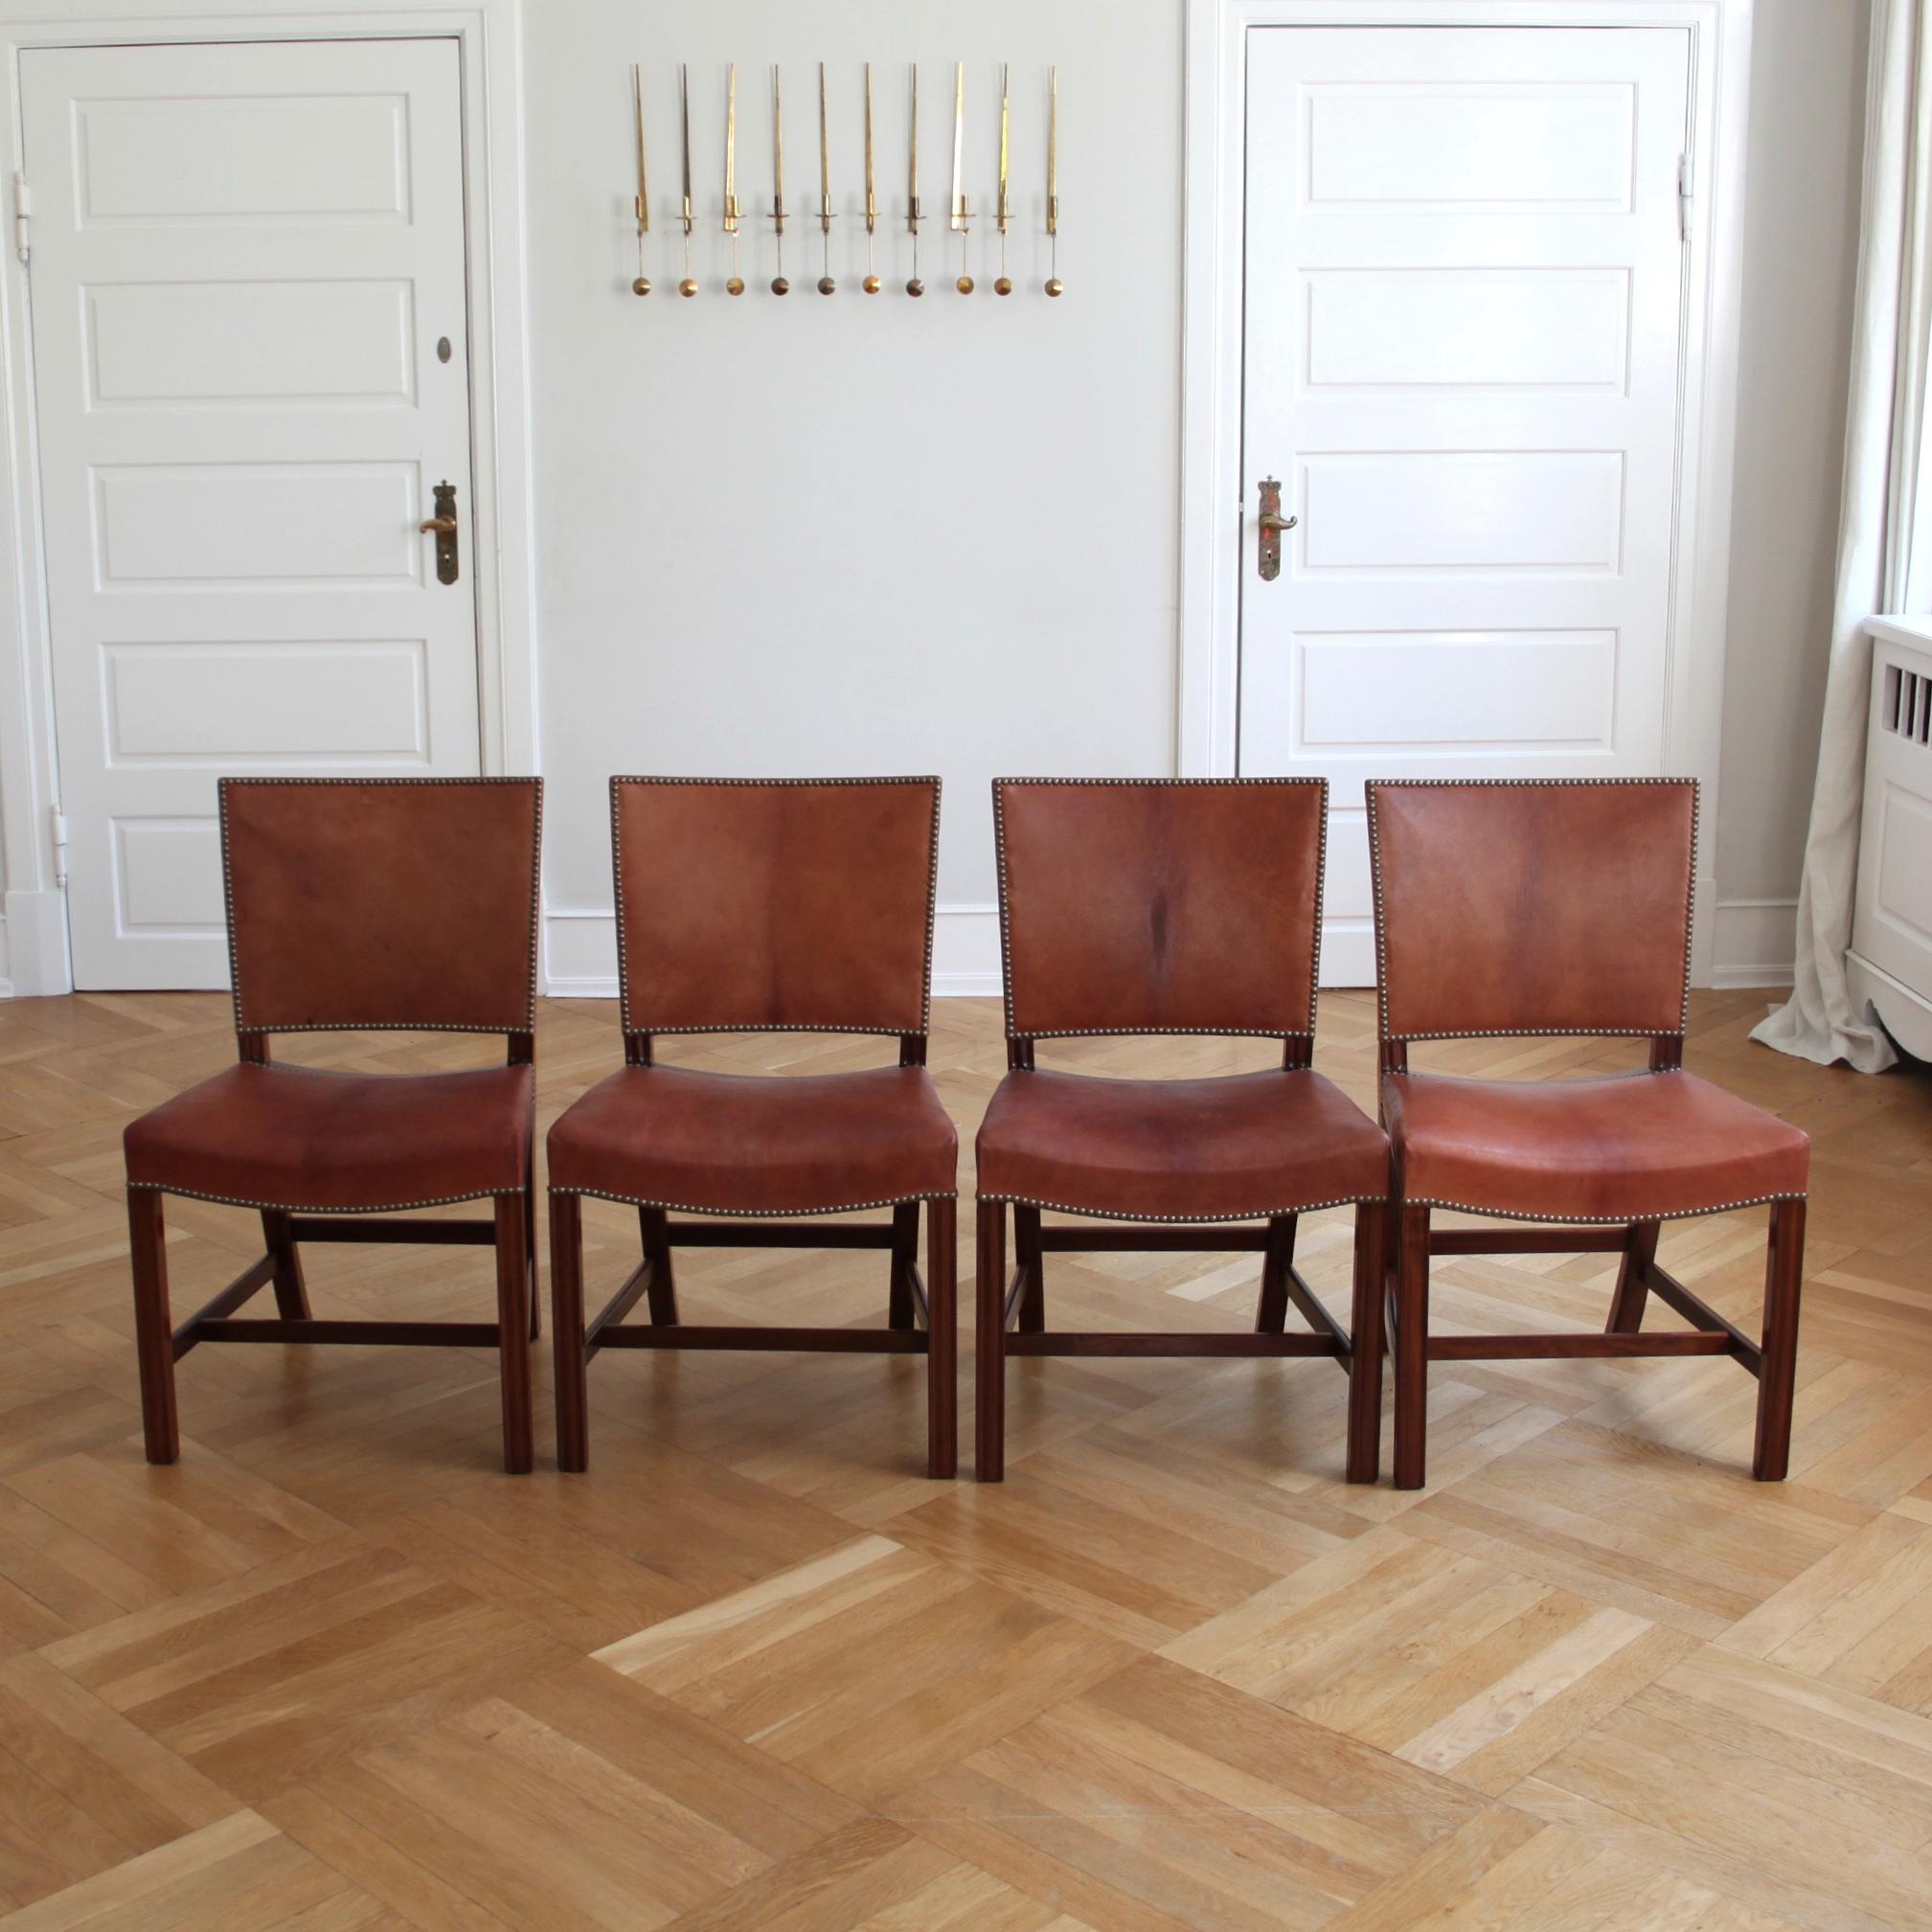 Set of 8 Kaare Klint Red Chairs, Niger Leather, Mahogany 1